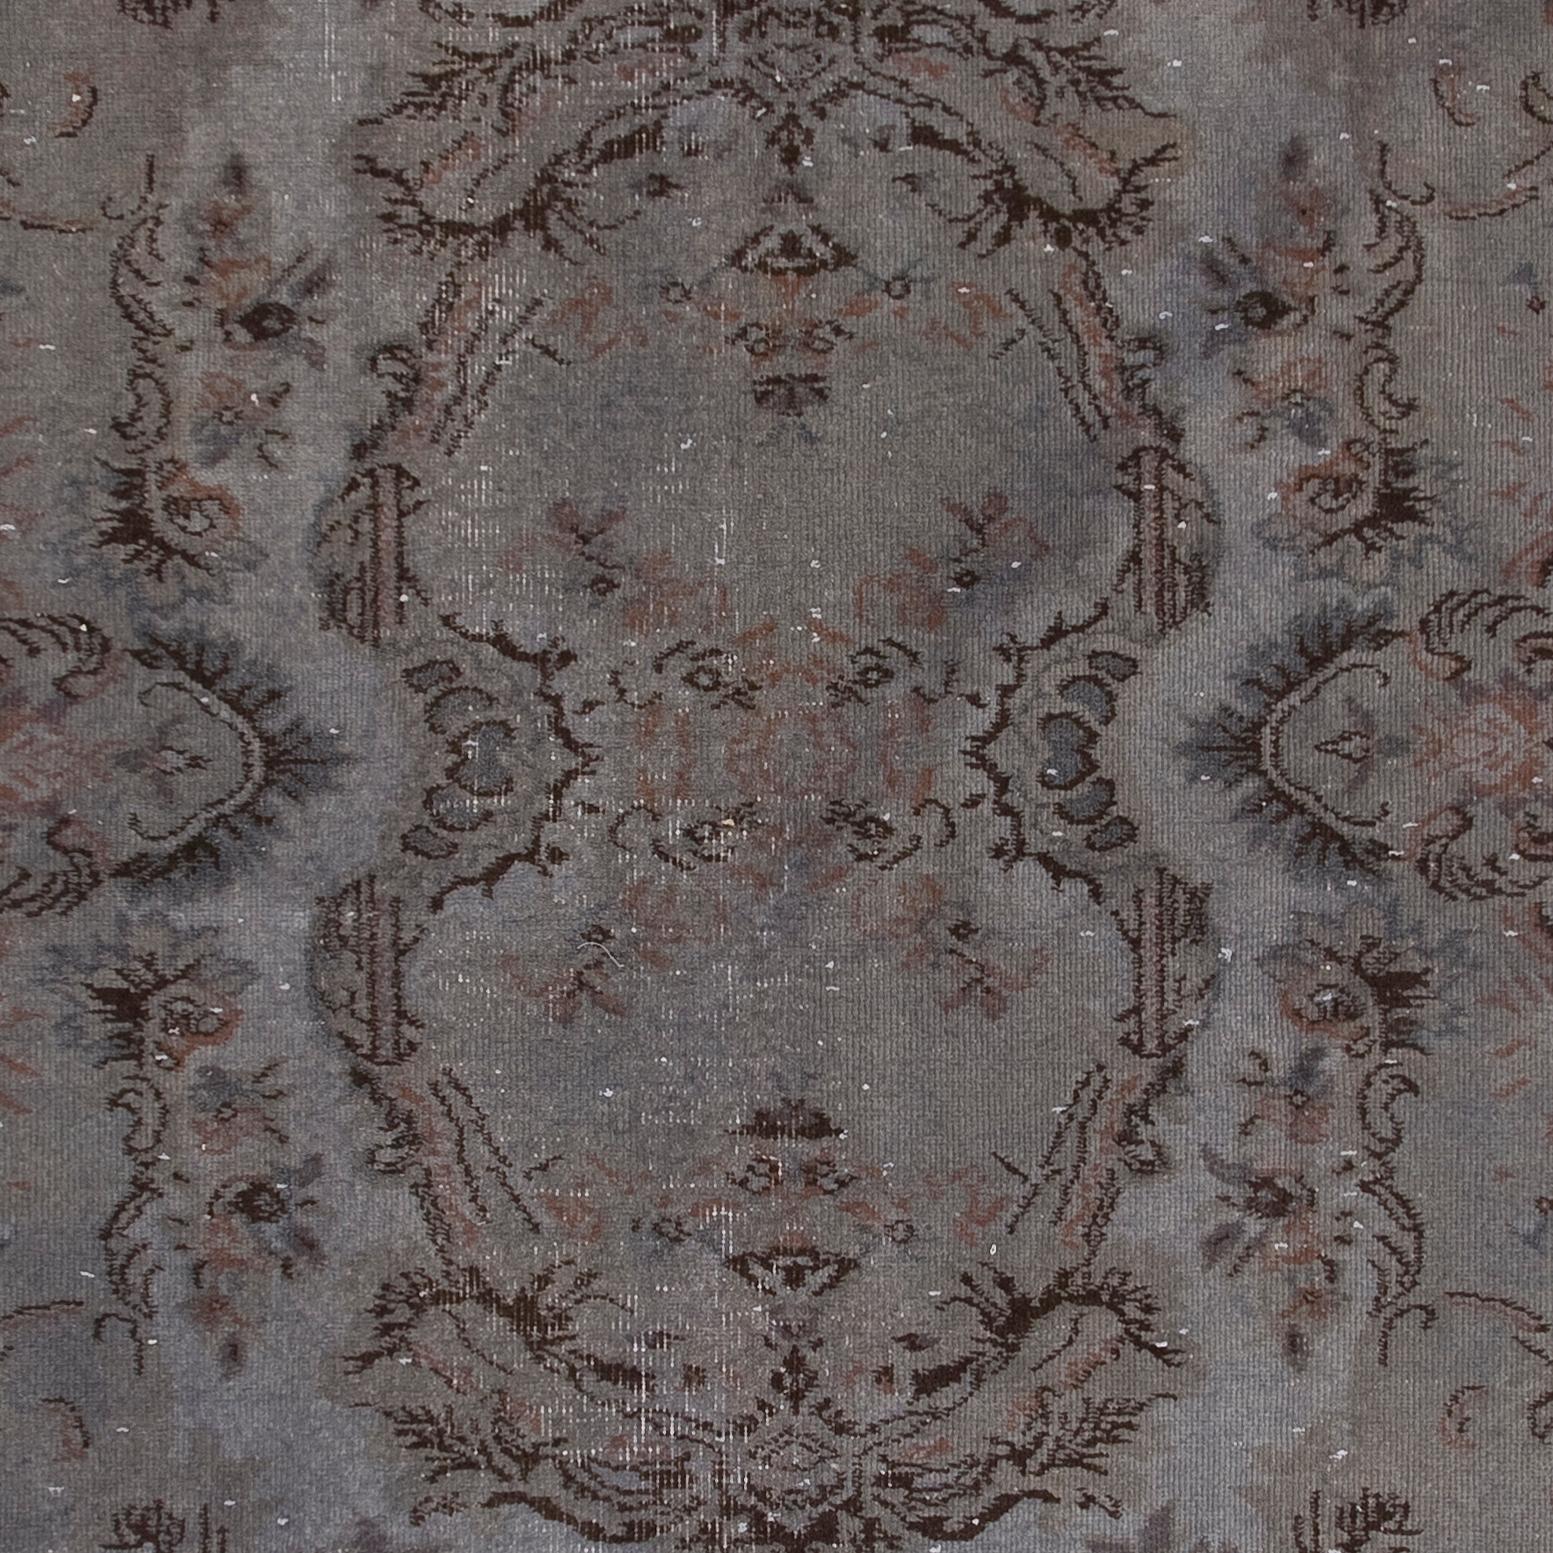 A French-Aubusson inspired vintage hand-knotted Turkish rug over-dyed in gray color. The rug features a design of a central floral cartouche, romantic cabbage roses, bold leafy motifs as well as a laurel border. It is finely hand-knotted with low